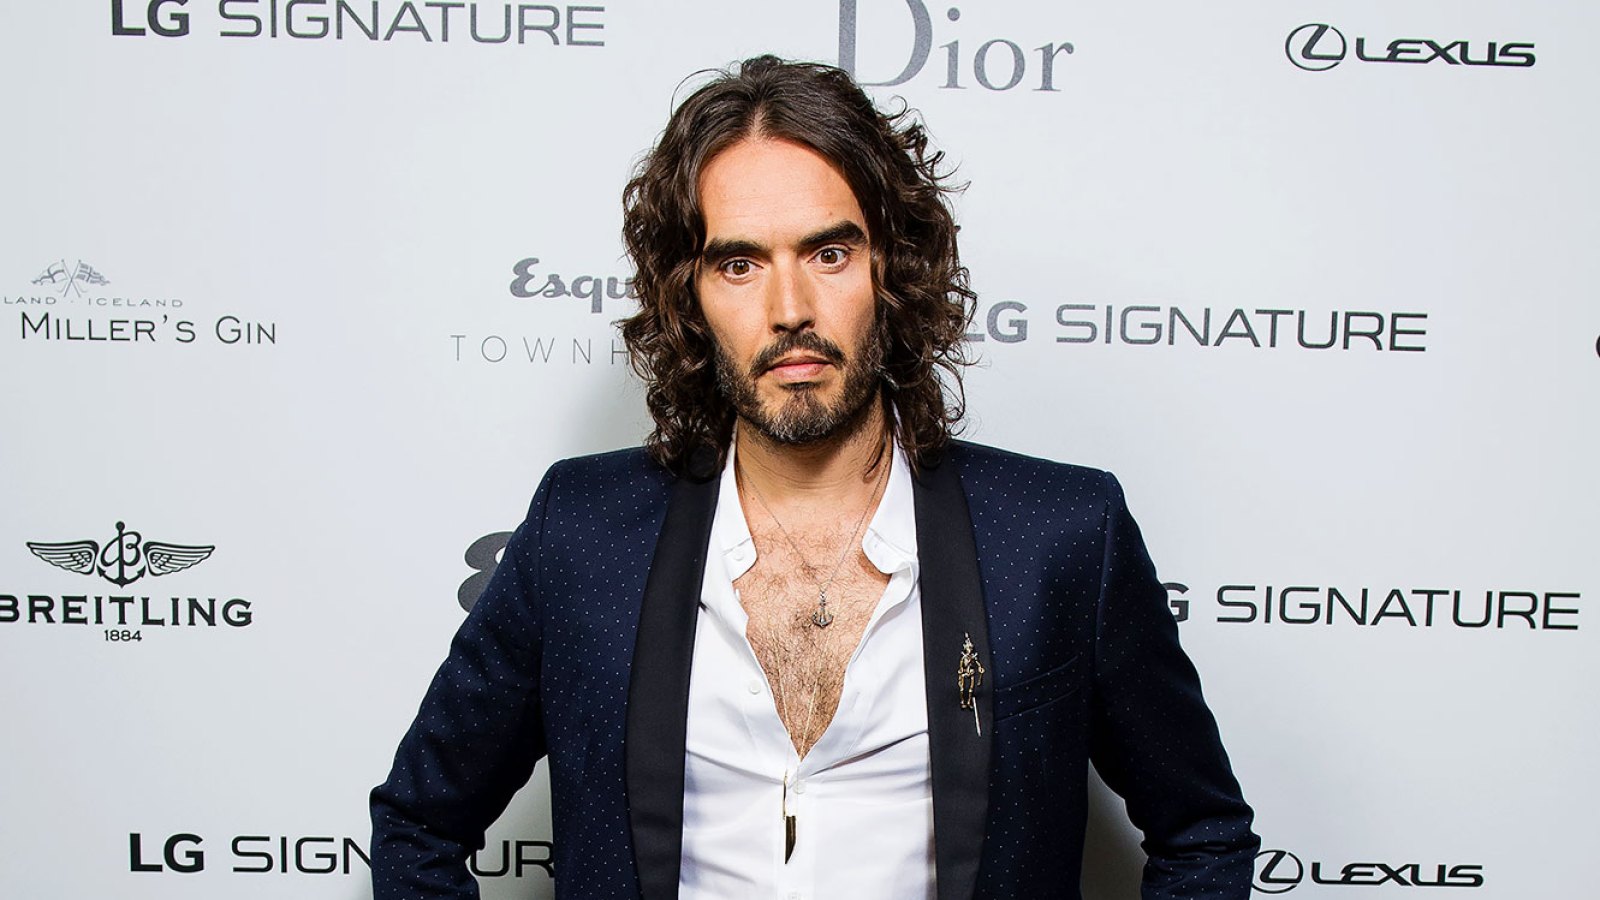 Feature Russell Brand Discusses Legal Sex With 15-Year-Old in Resurfaced Clip